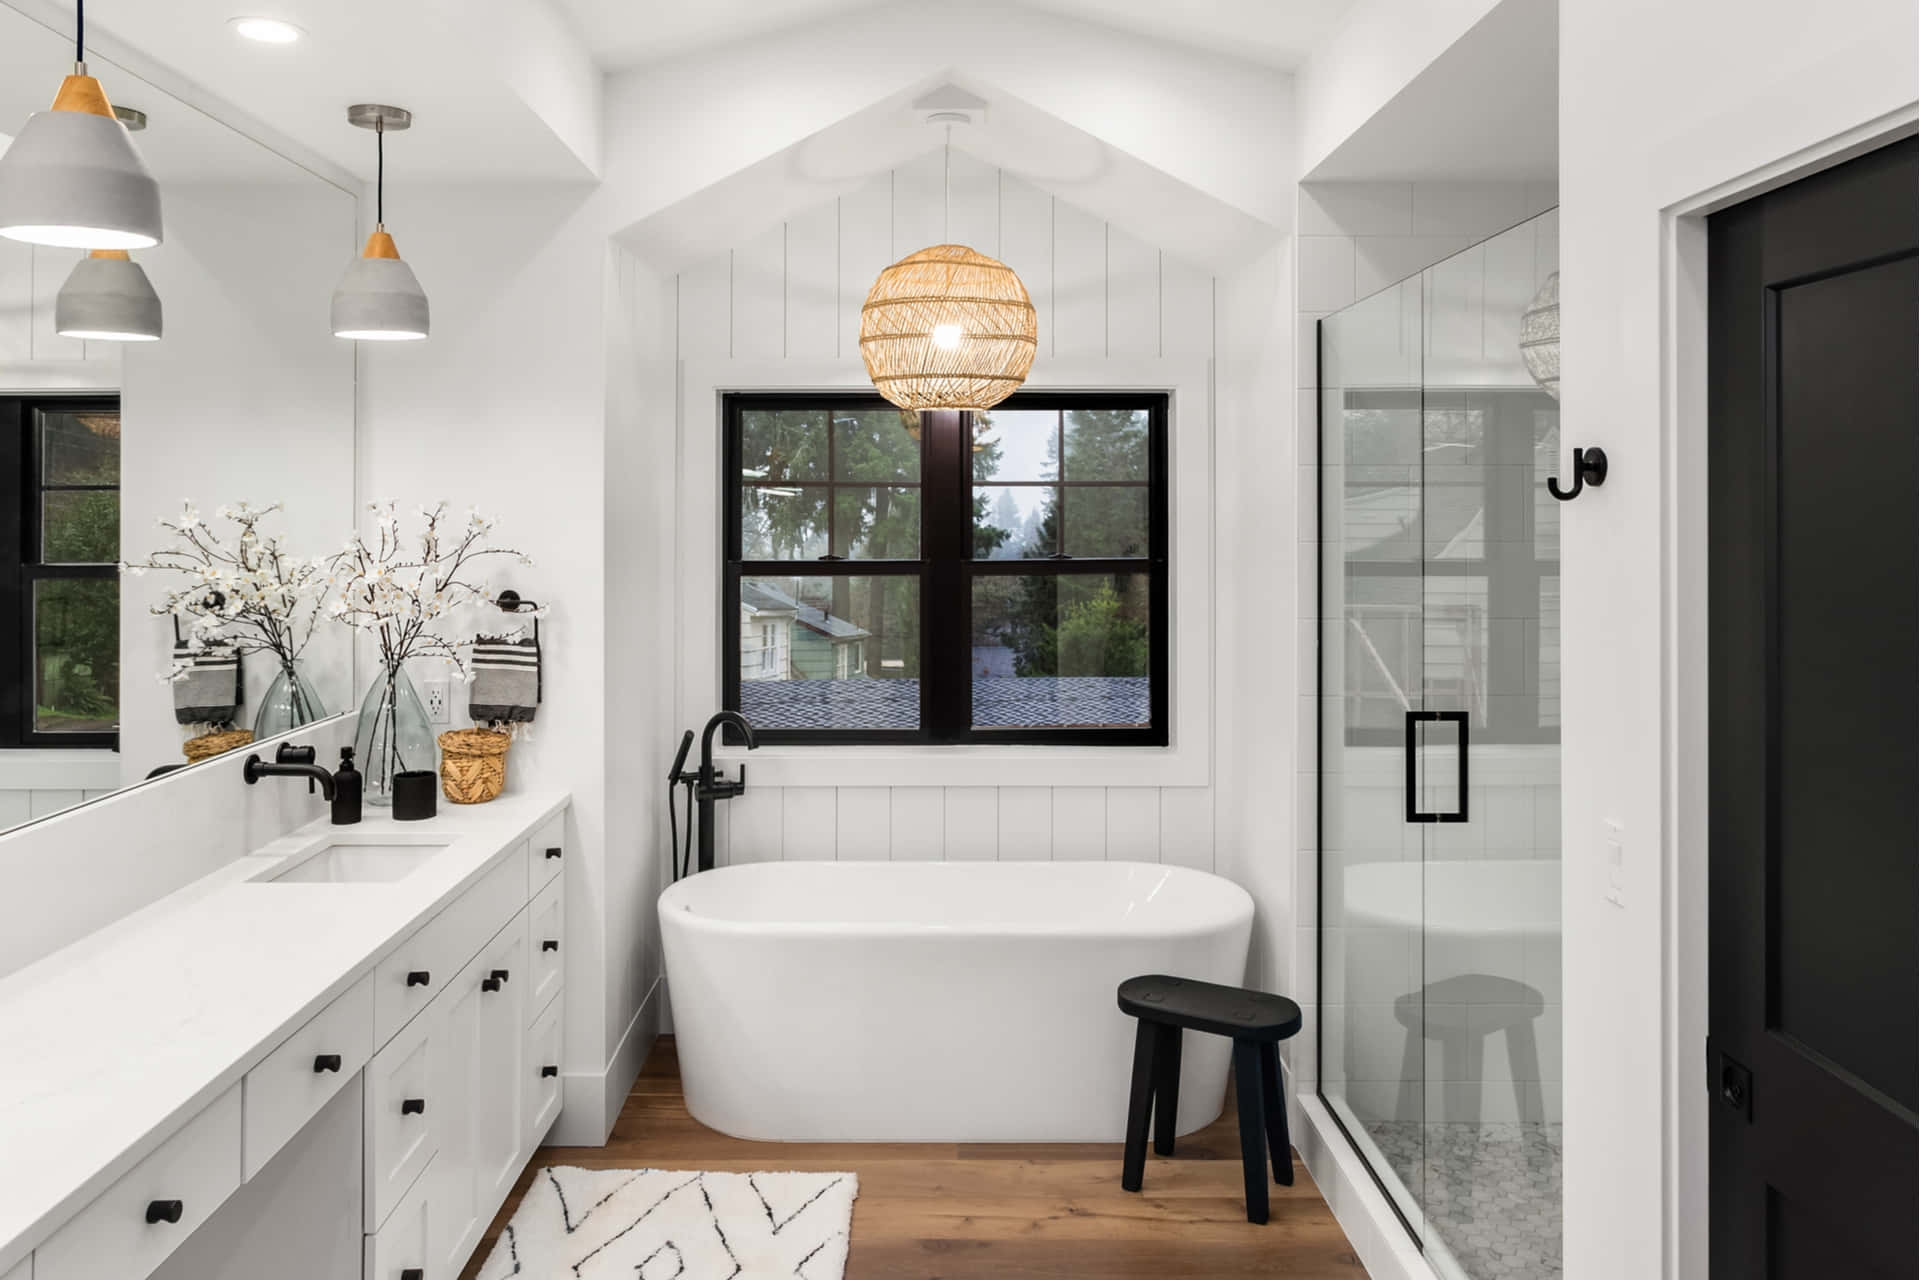 A splash of black and white contrasts in a modern bathroom